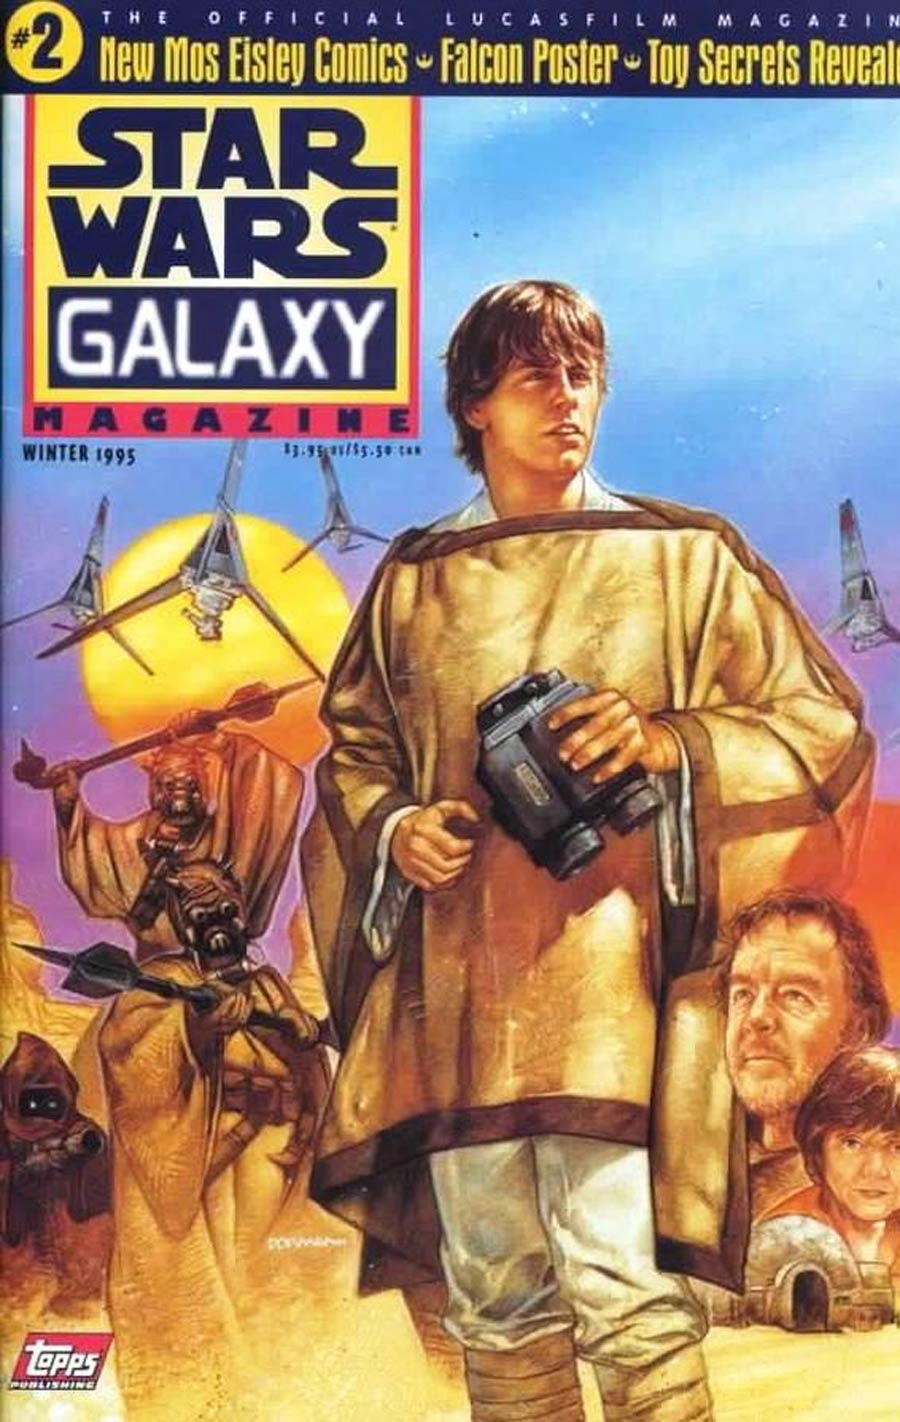 Star Wars Galaxy Magazine #2 Cover A Polybagged